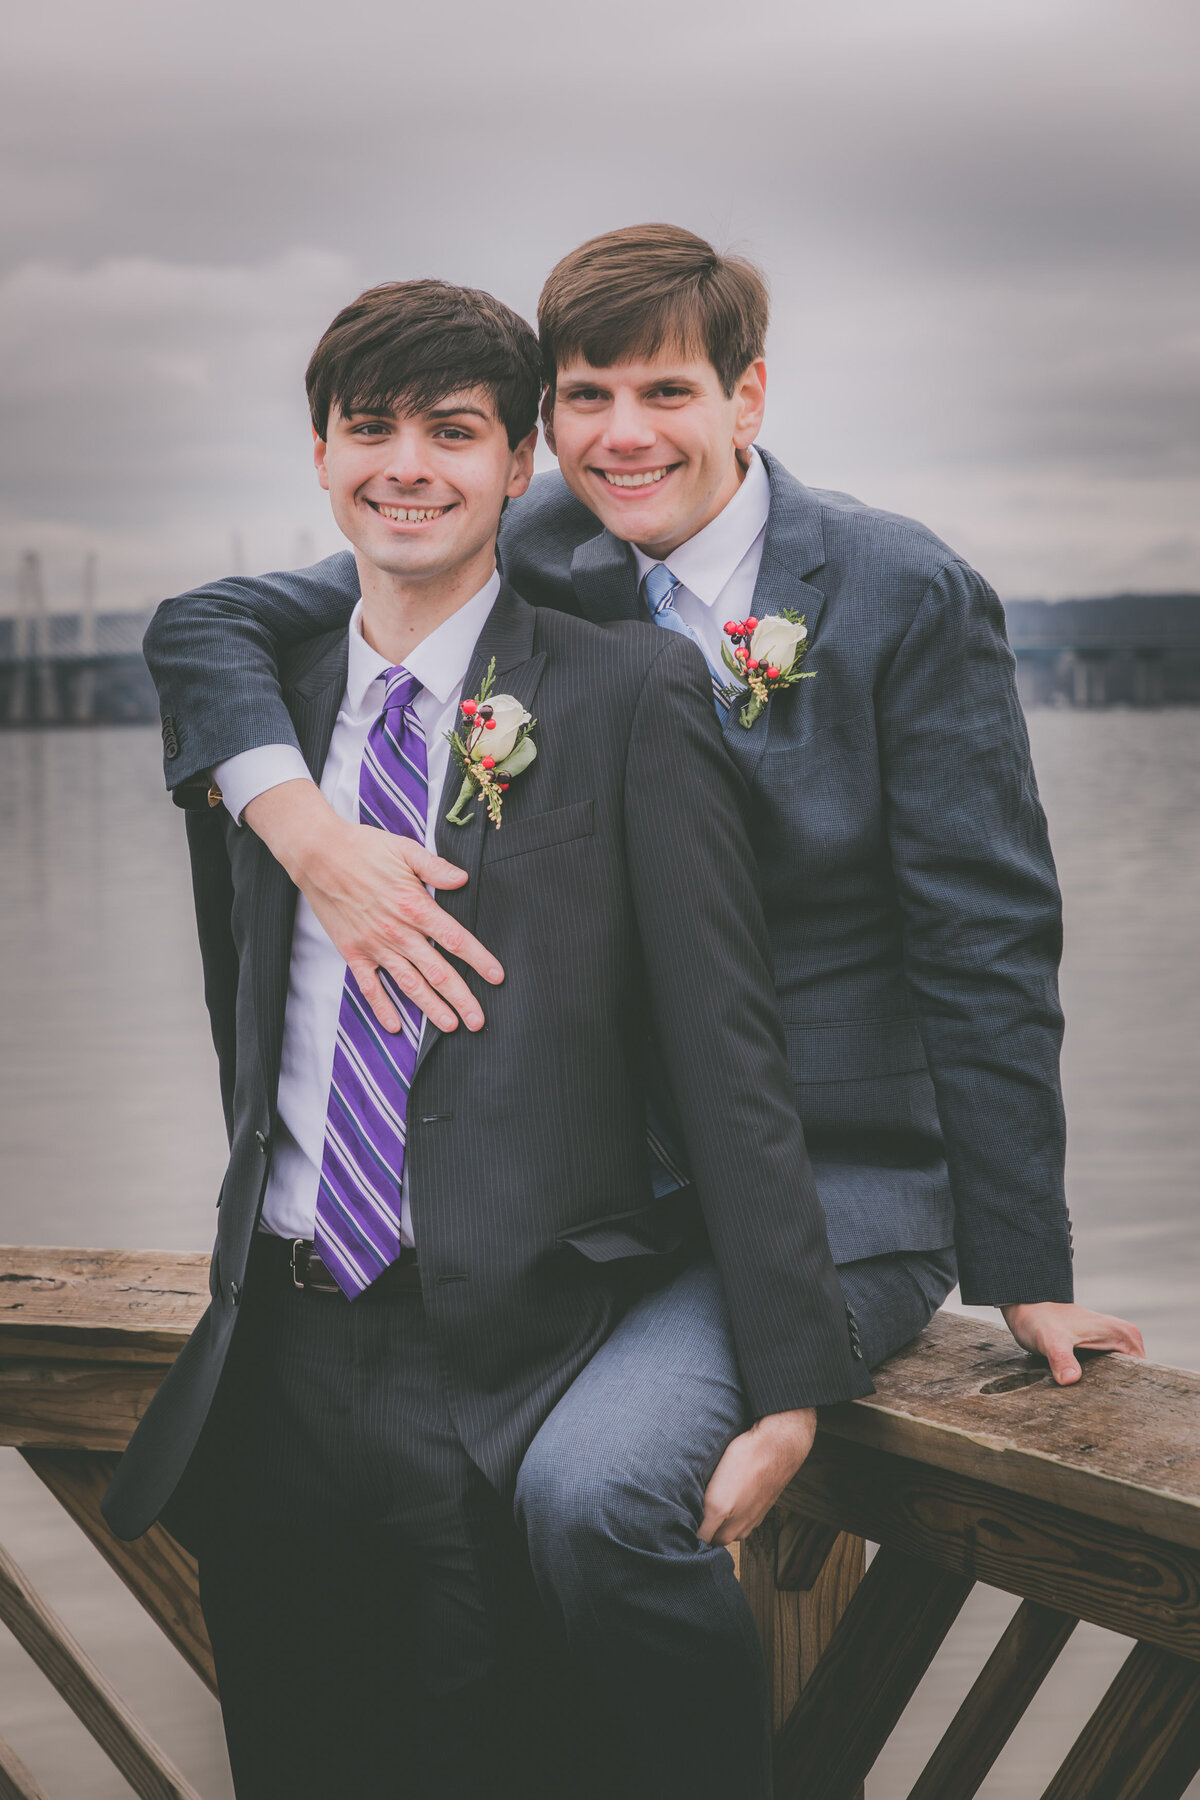 Two grooms pose for a portrait.